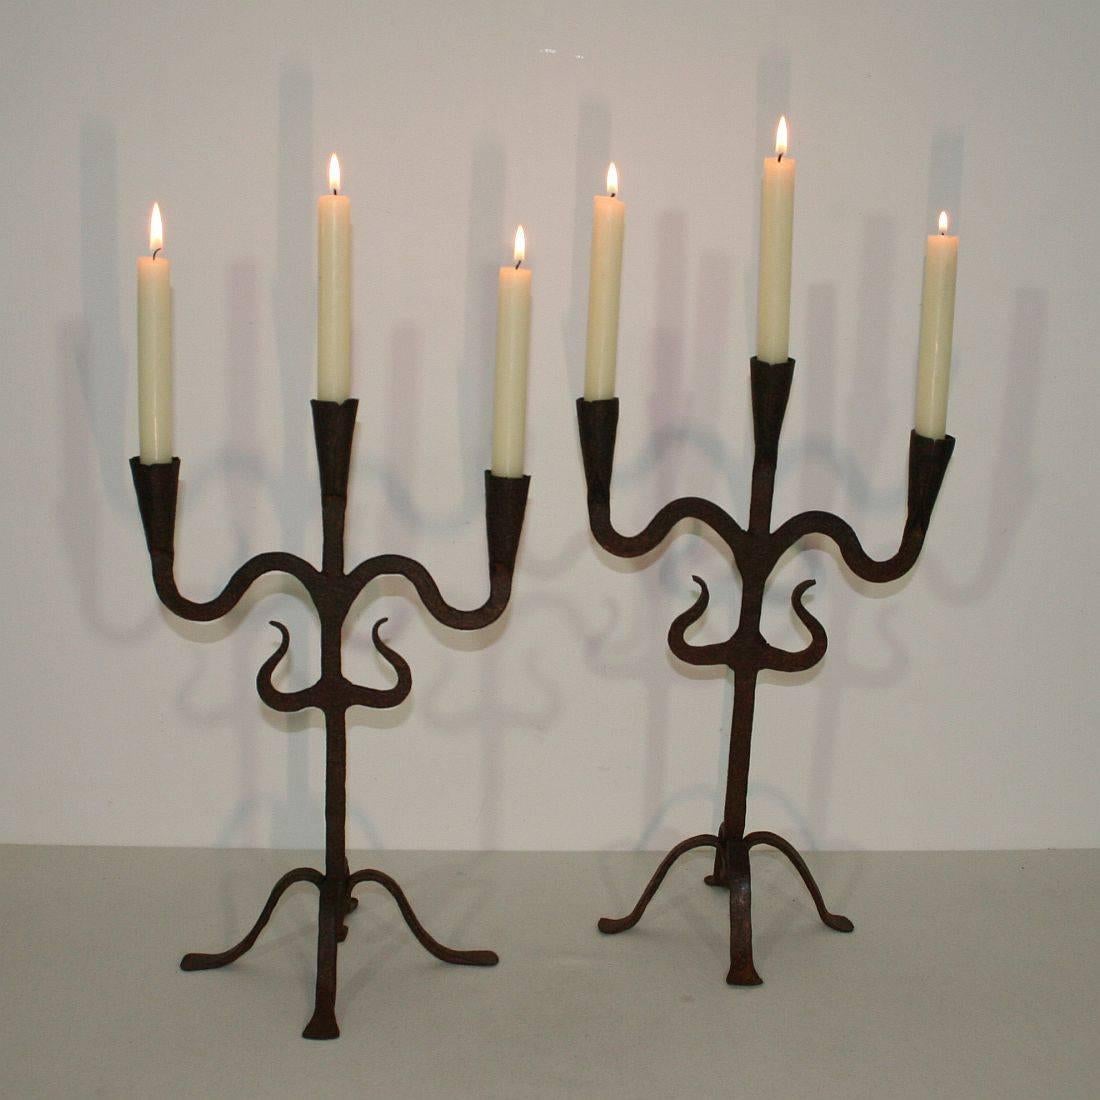 Beautiful pair of hand-forged iron candleholders.
Southern France-Northern Spain, 18th century.
Weathered.